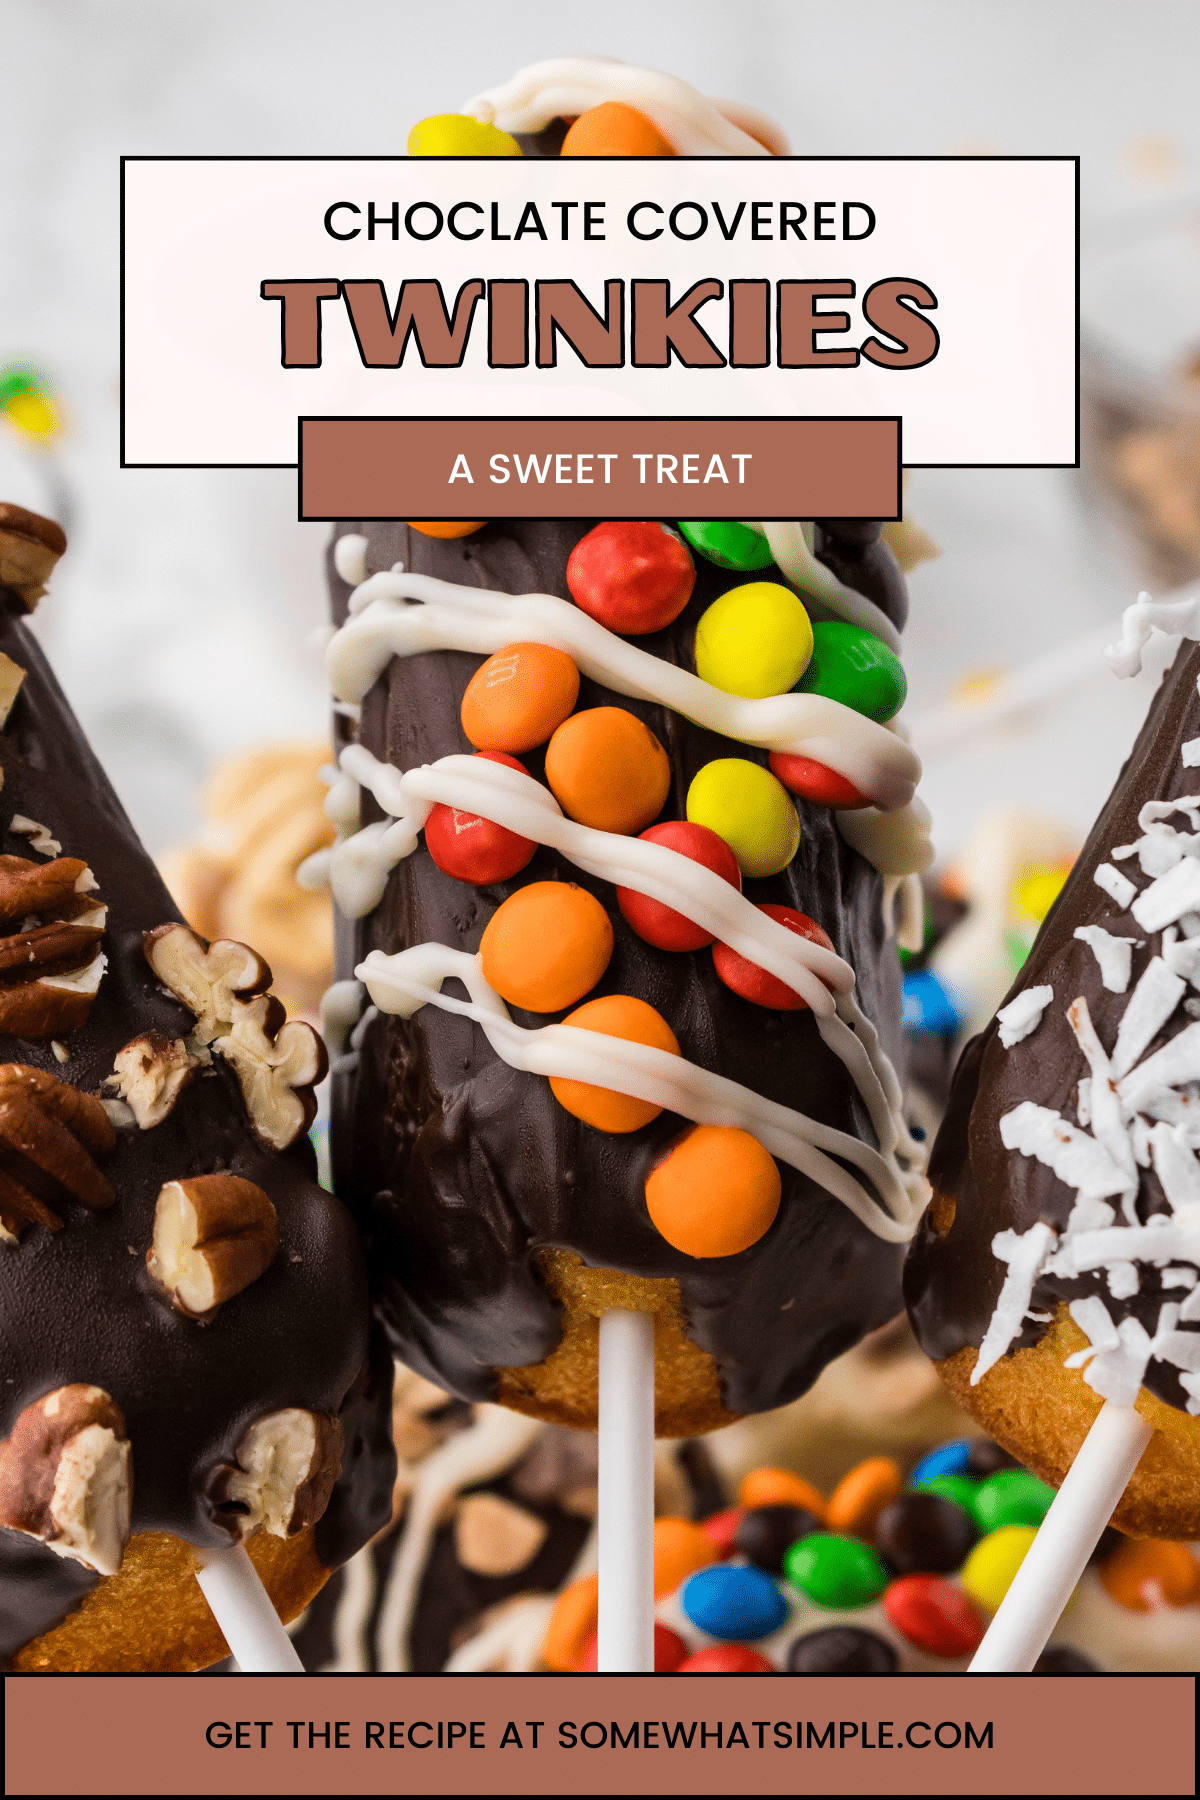 Level up those Twinkies by putting them on a stick and dipping them in chocolate! Chocolate Covered Twinkies are a fun and delicious treat! via @somewhatsimple